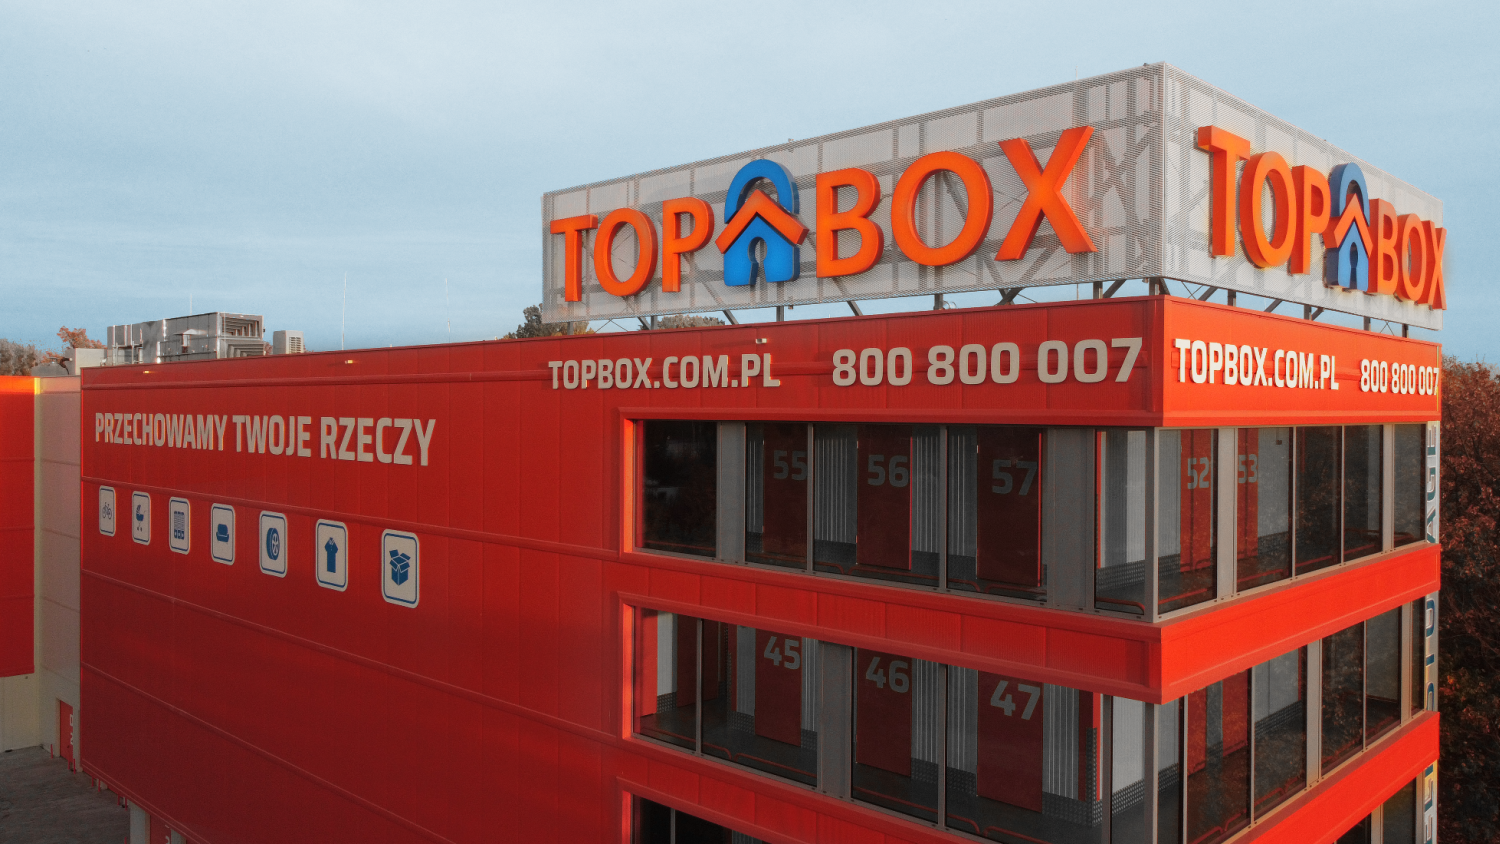 News Article Griffin Capital Partners investment Poland Redefine Properties self-storage Stokado Top Box